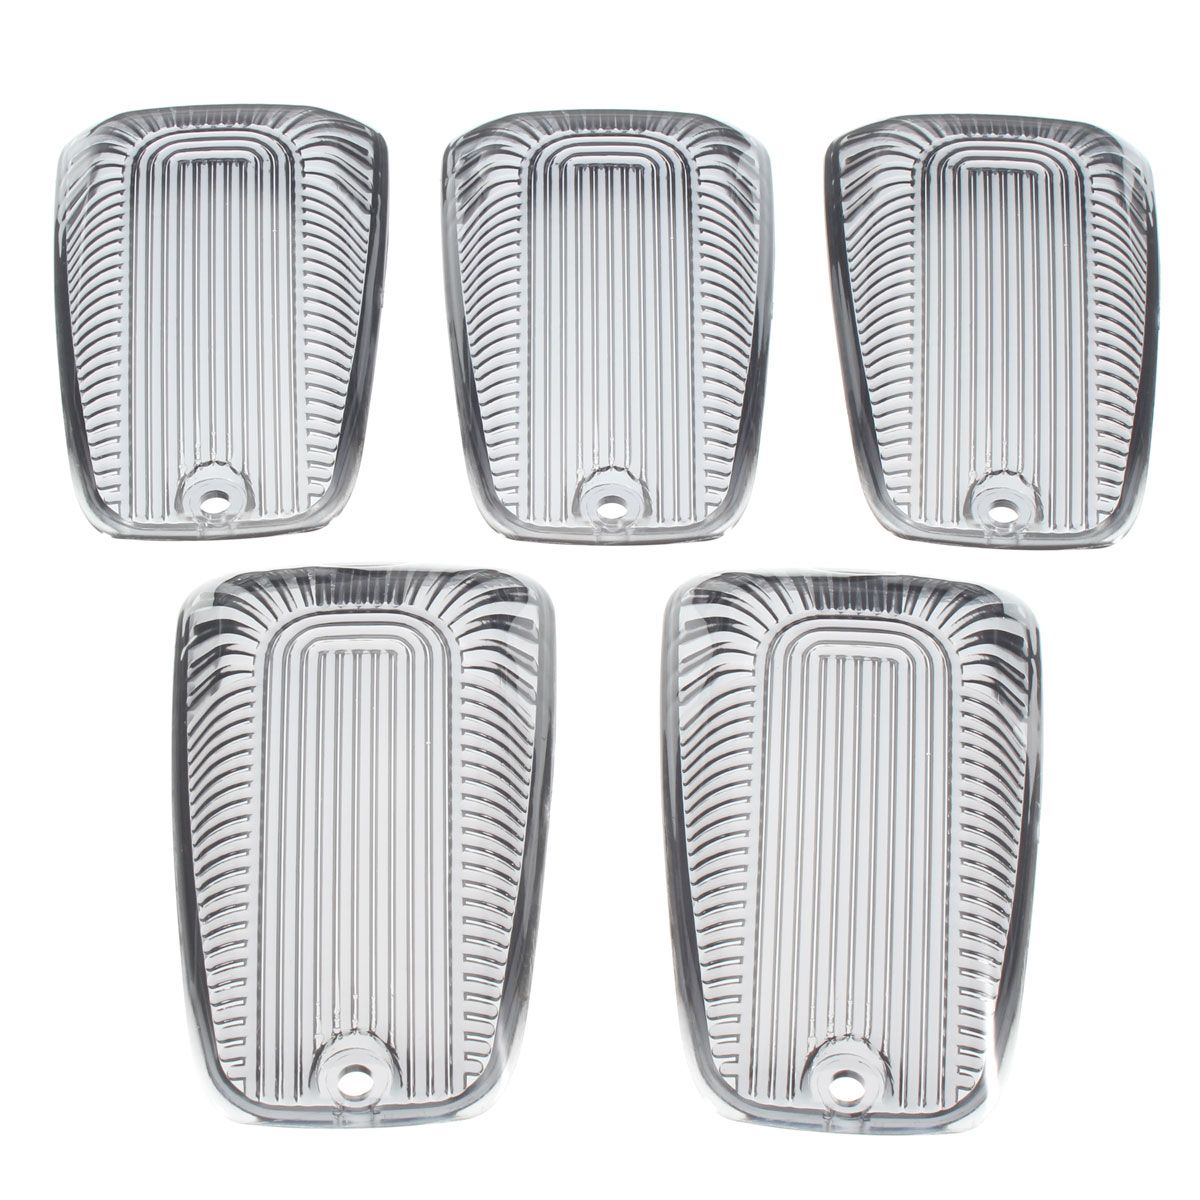 5pcs-Smoke-Top-Lamp-Lens-Roof-Running-Light-Cab-Marker-Cover-For-Ford-GMC-1059747